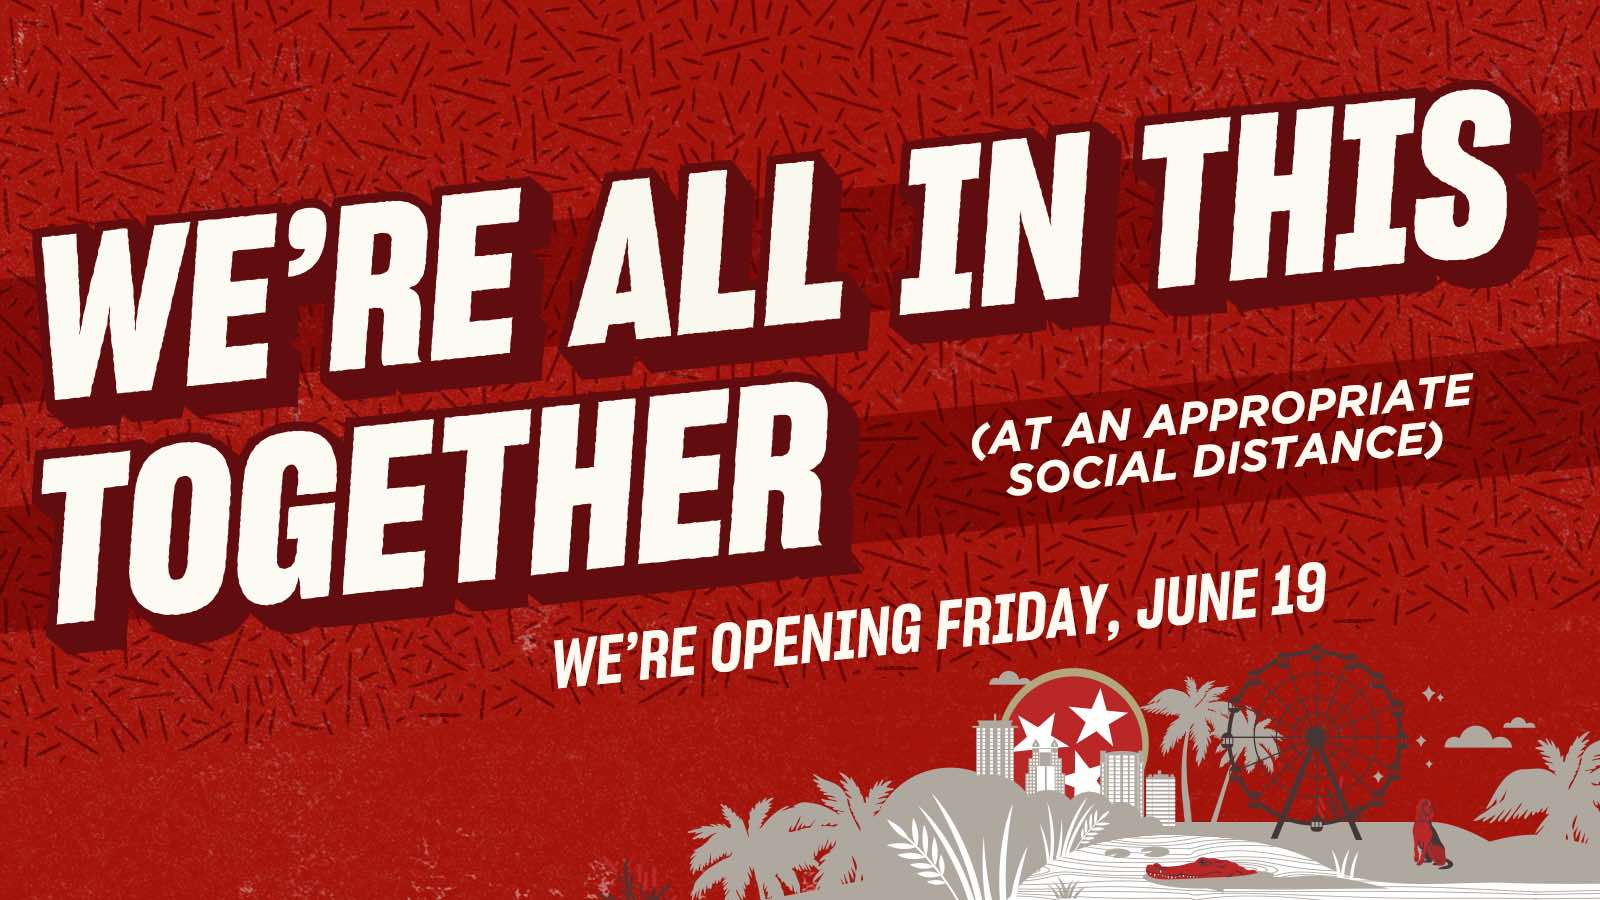 We’re All In This Together (at an appropriate social distance) - We’re Opening Friday, June 19, 2020 - Click To Learn More